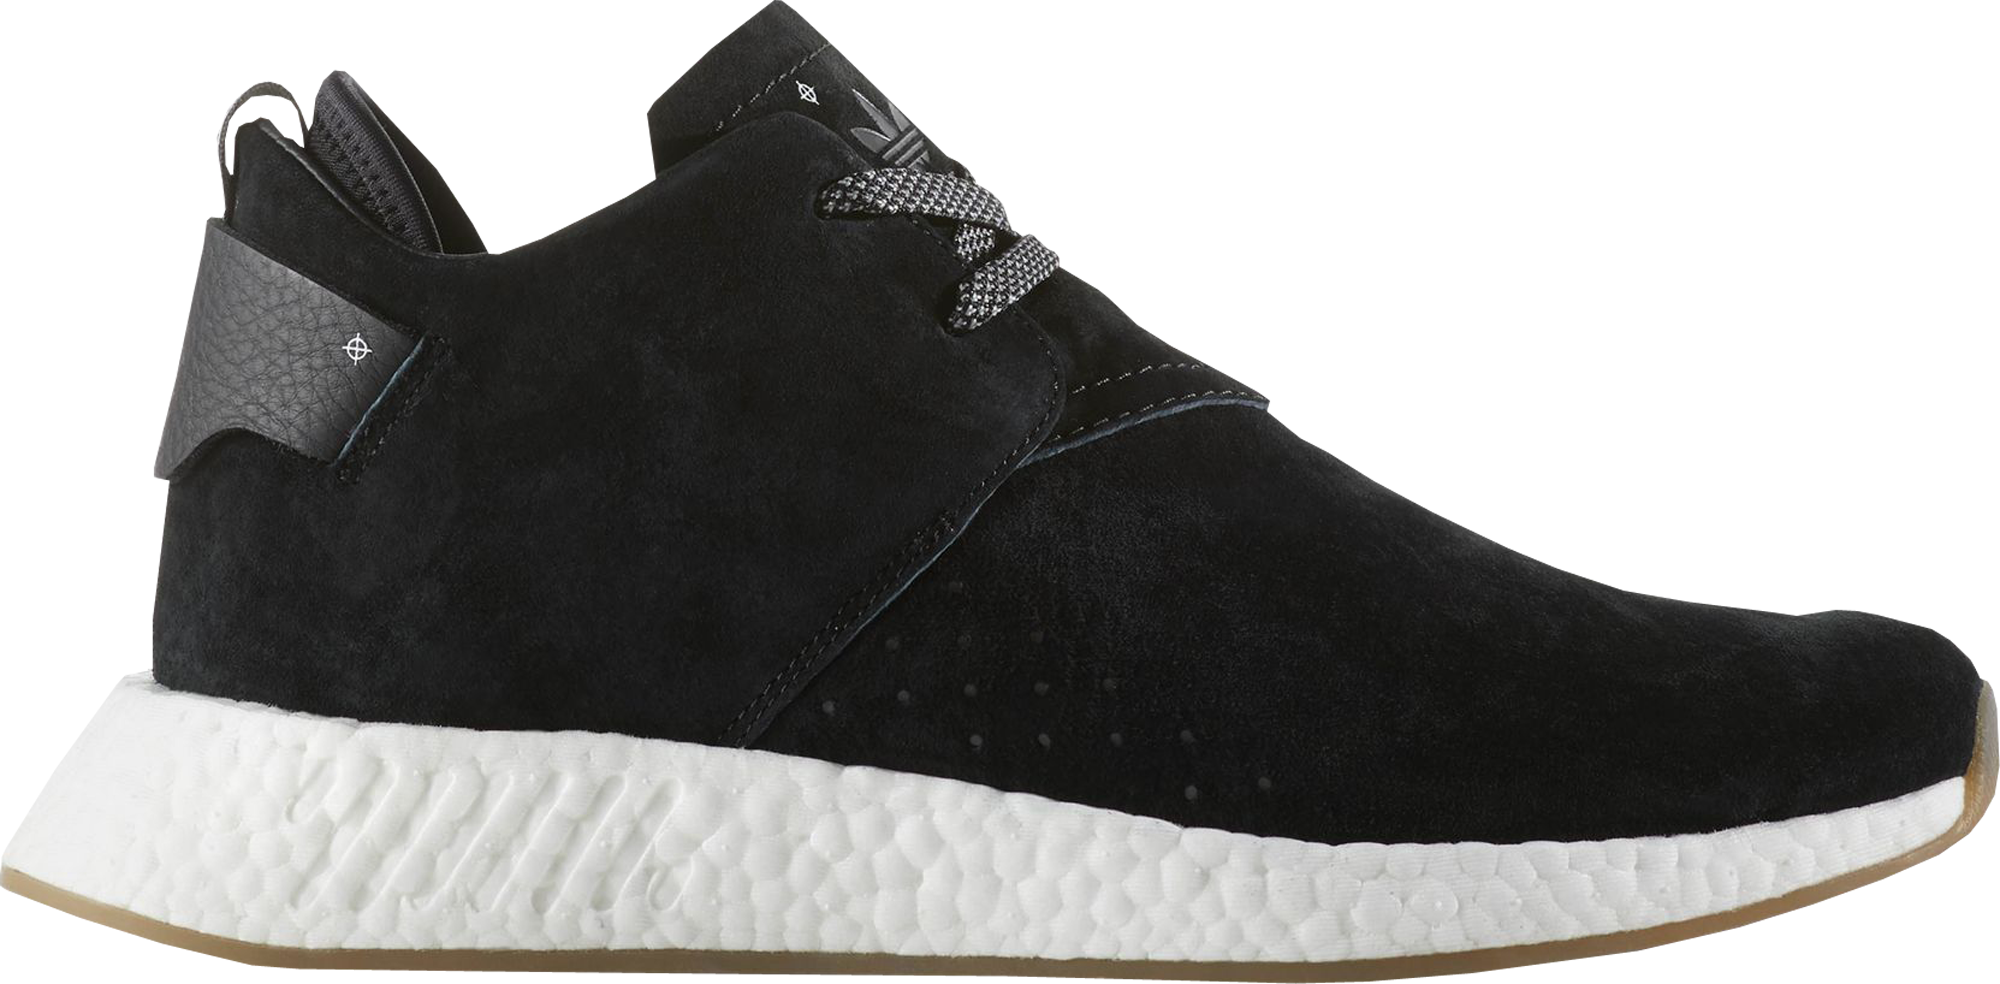 adidas NMD CS2 Suede Black - BY3011